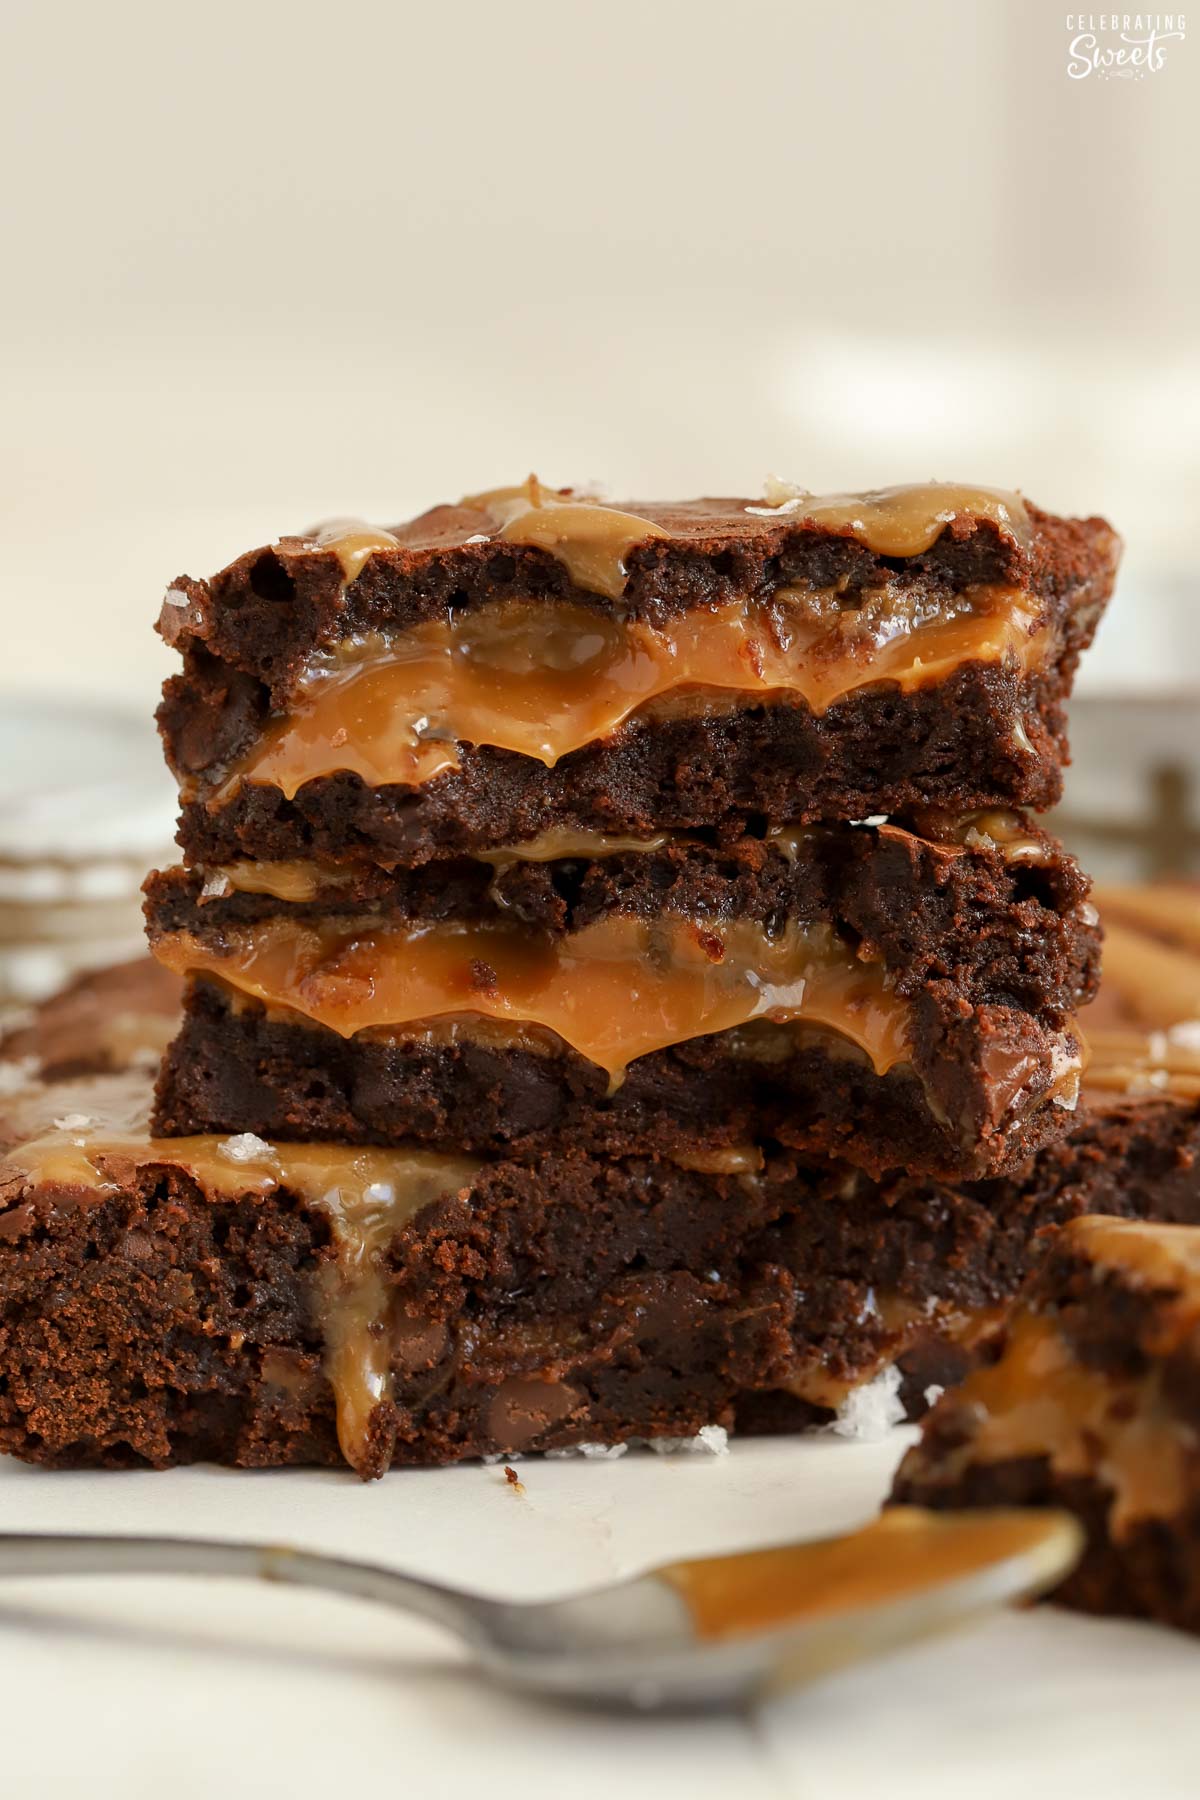 Stack of three caramel brownies on parchment paper.